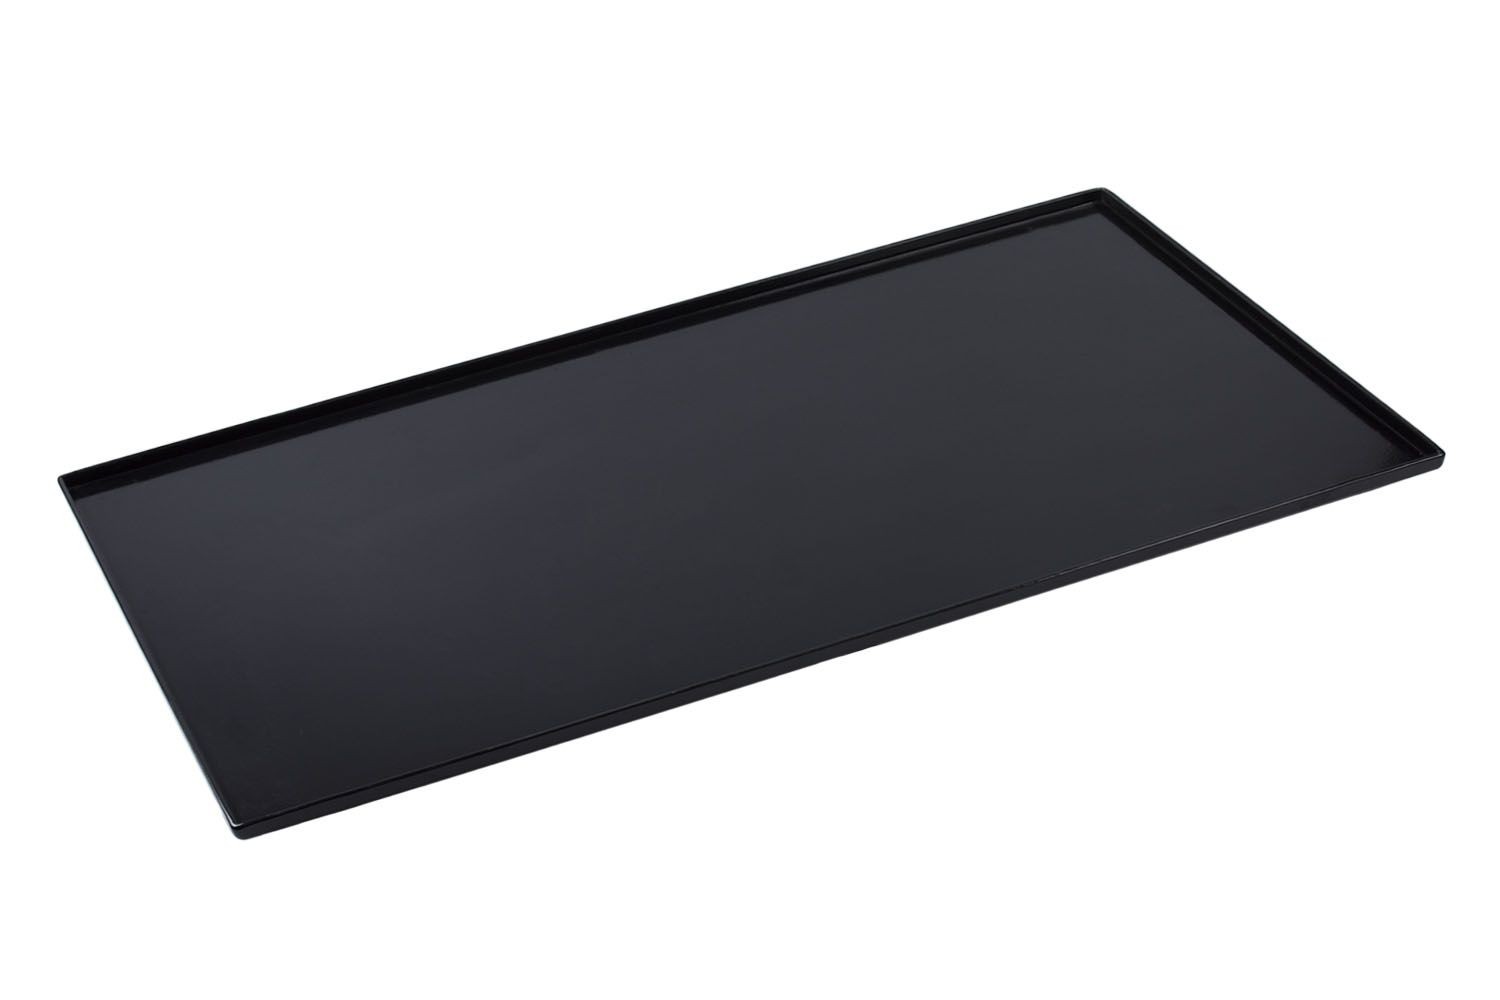 Bon Chef 2185BLK Grill Tray for 4 Well Application, Black 58" x 24 3/4"